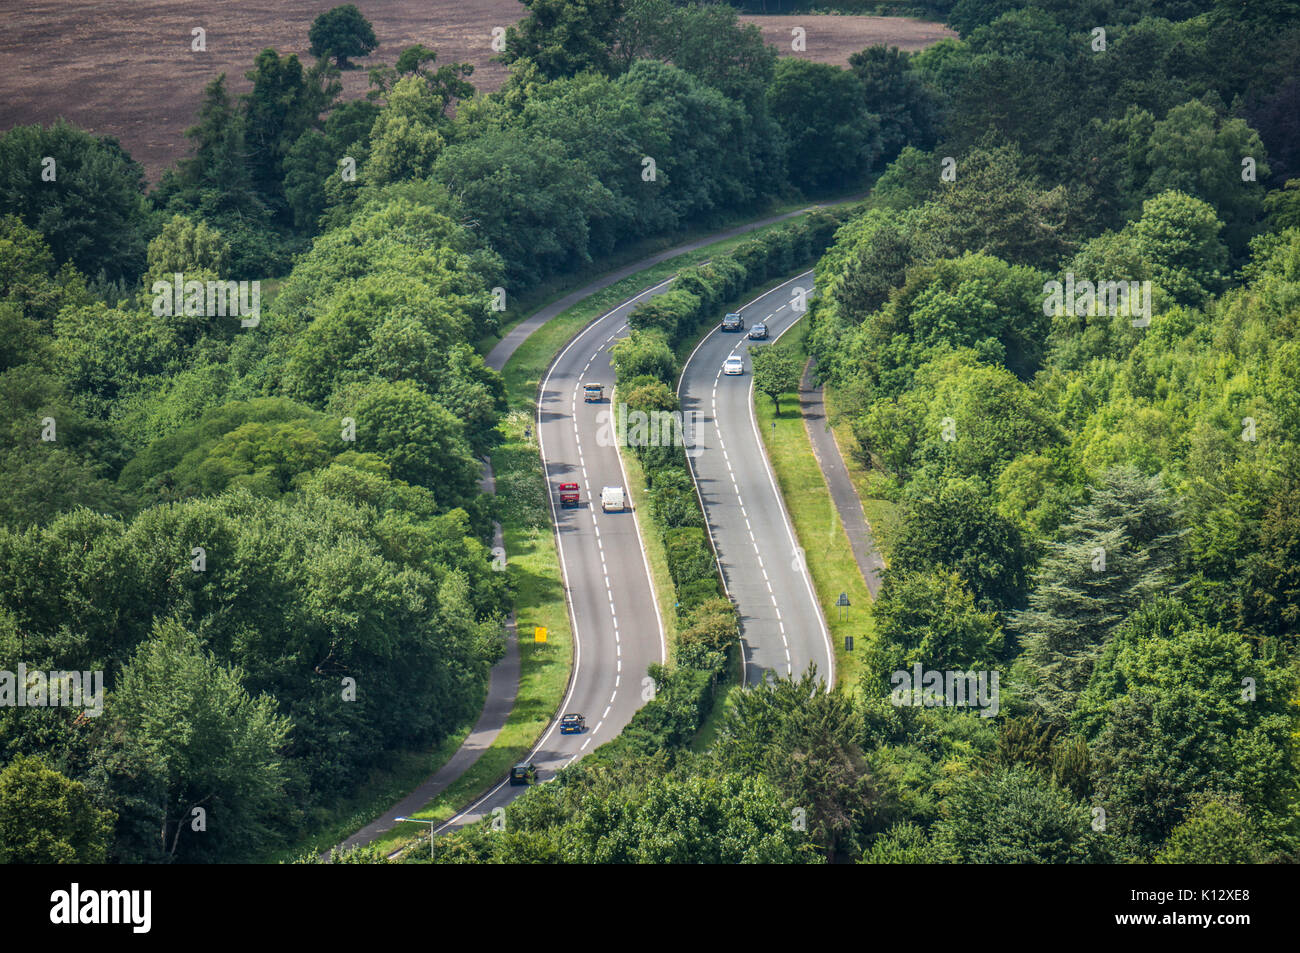 Taken from Box Hill in summer, traffic on bends in the dual carriageway, near Dorking, Surrey, England, UK. Stock Photo